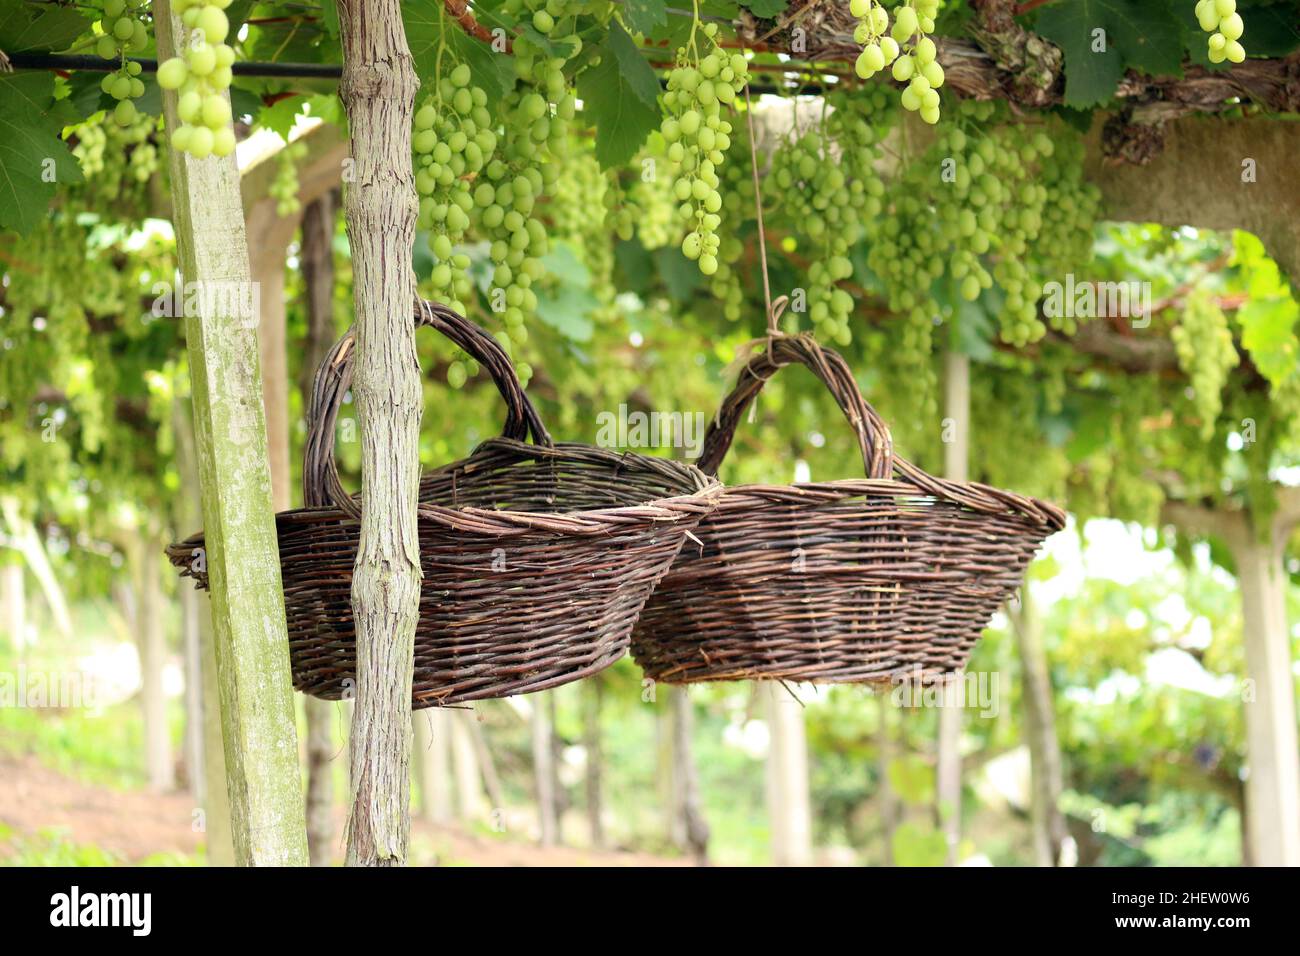 In the back of an immense vineyard, between the large bunches of green grapes, two hand-made baskets, produced with wicker, are hanging. Stock Photo